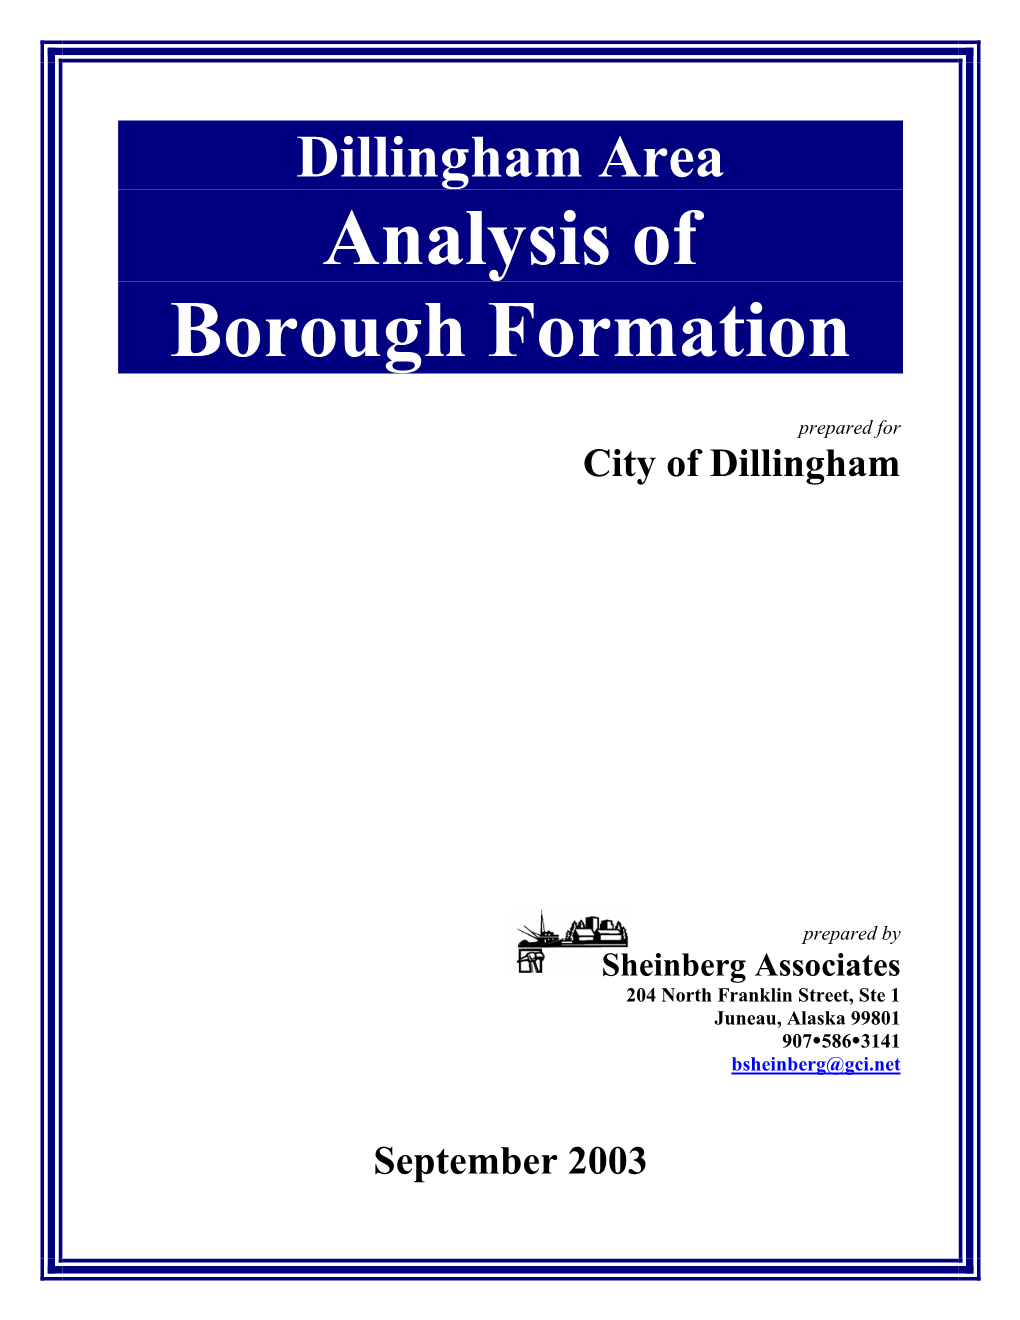 Dillingham Area Analysis of Borough Formation 2003